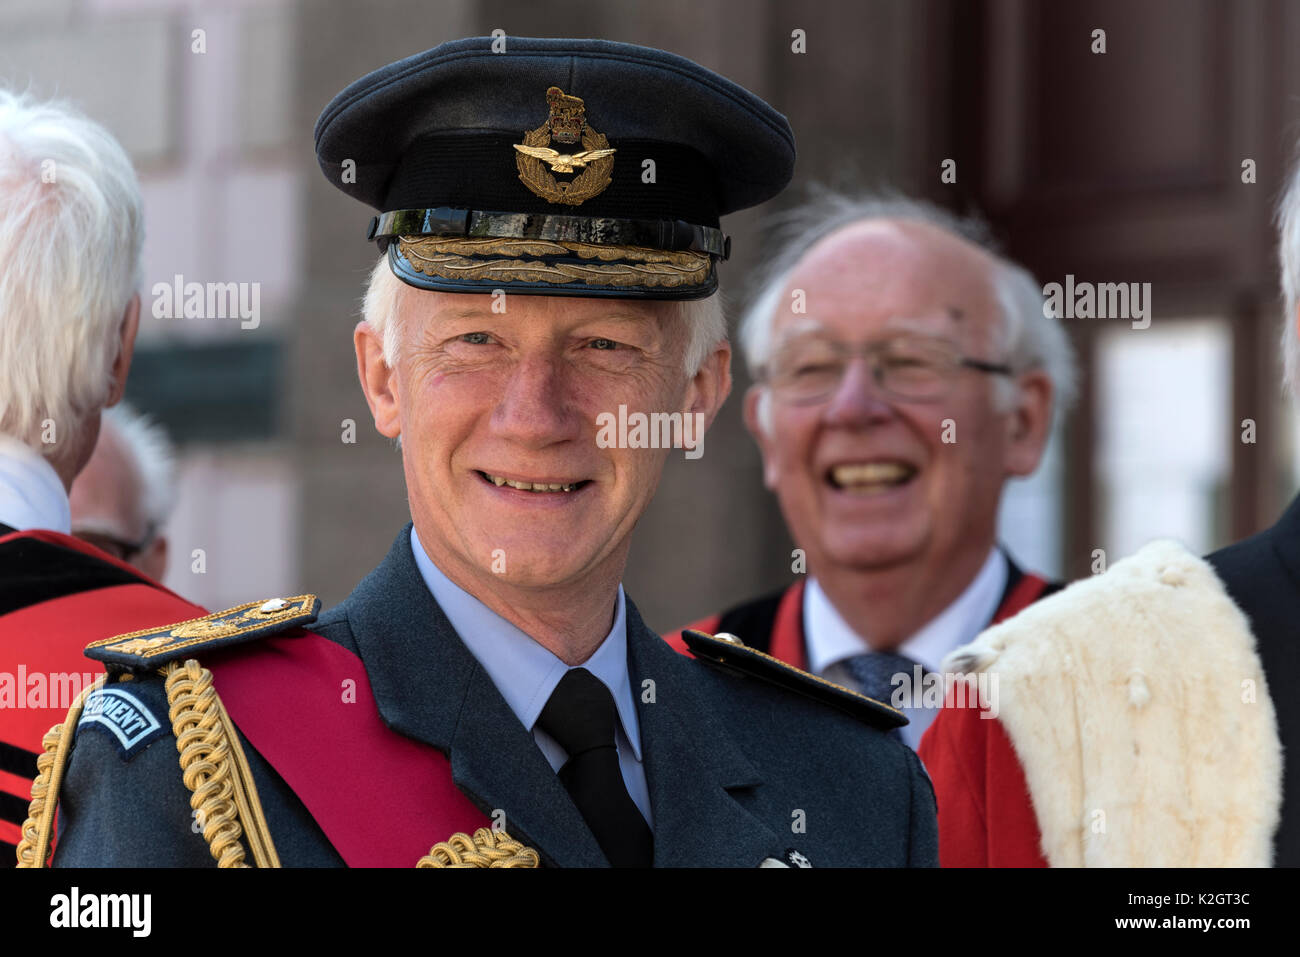 Annual Liberation Day 2017 celebrations in St. Helier, Jersey, Channel Islands, Britain  The Lieutenant-Governor of Jersey, Air Chief Marshal Sir Step Stock Photo